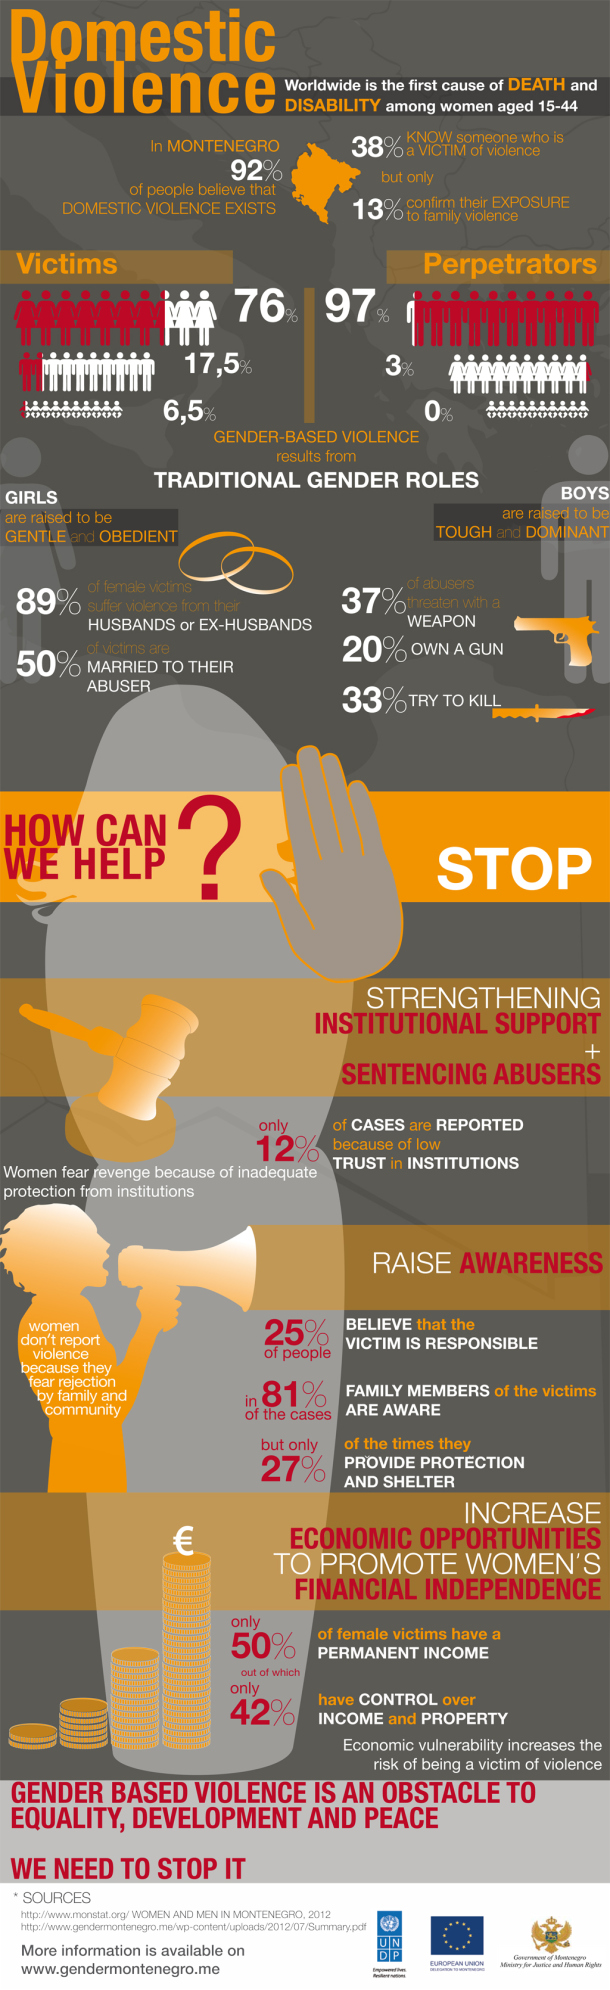 Domestic Violence Trends and Facts